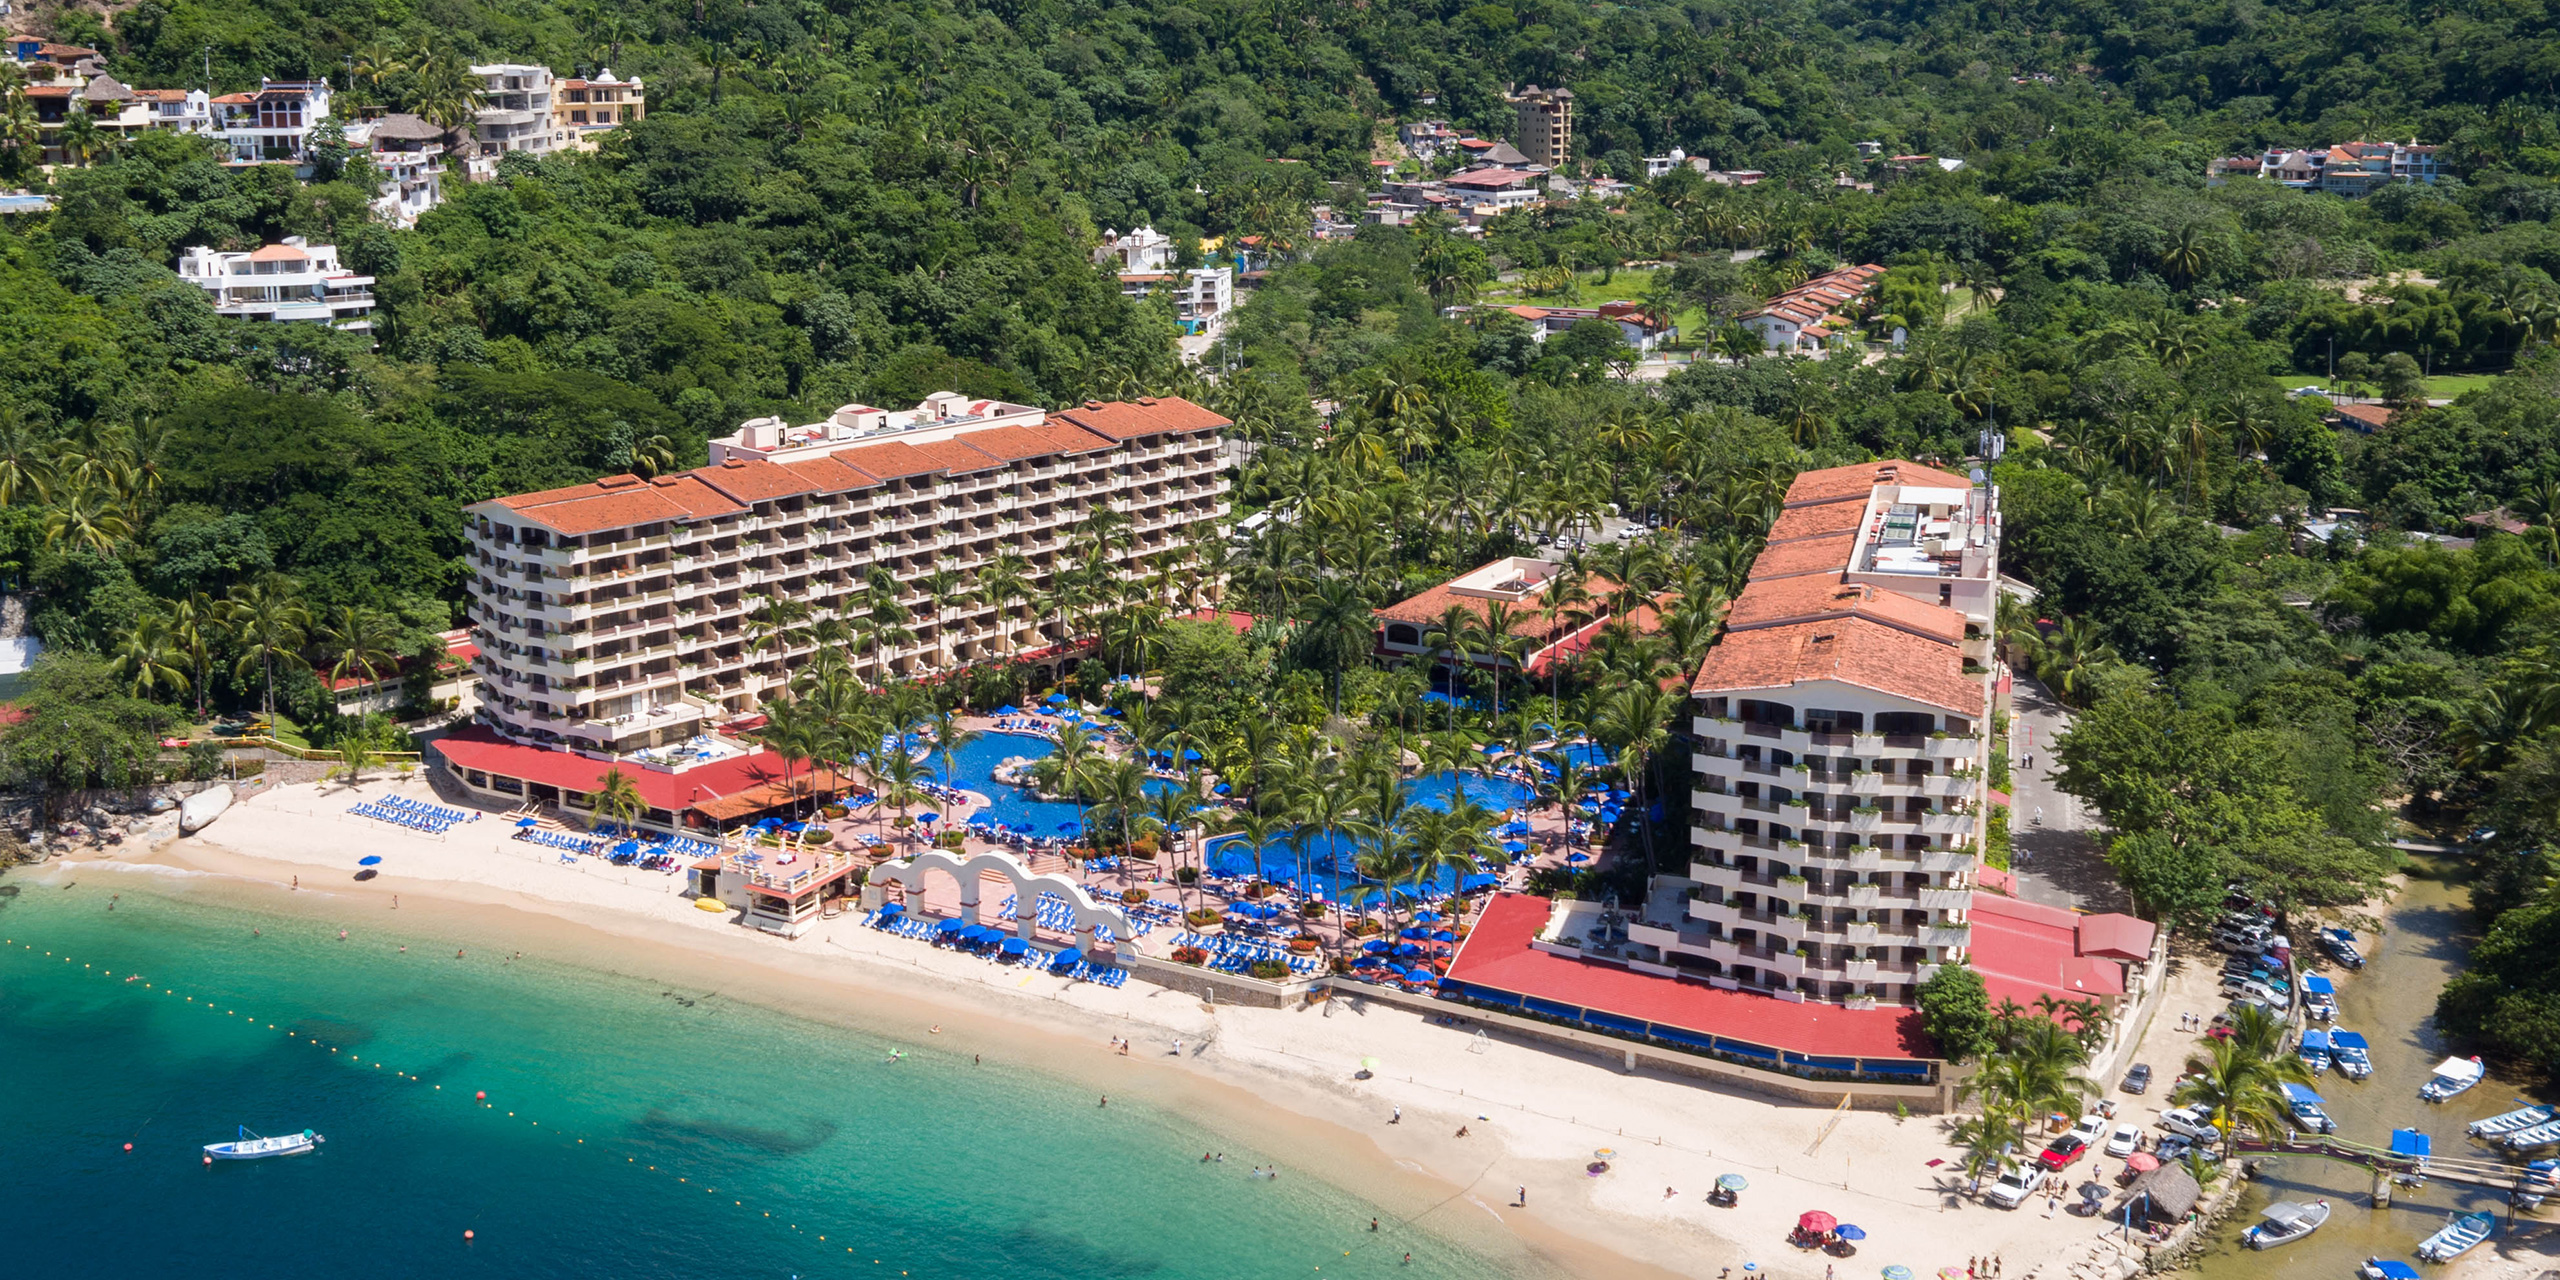 10 Best All Inclusive Resorts For Families Of 5 Or More